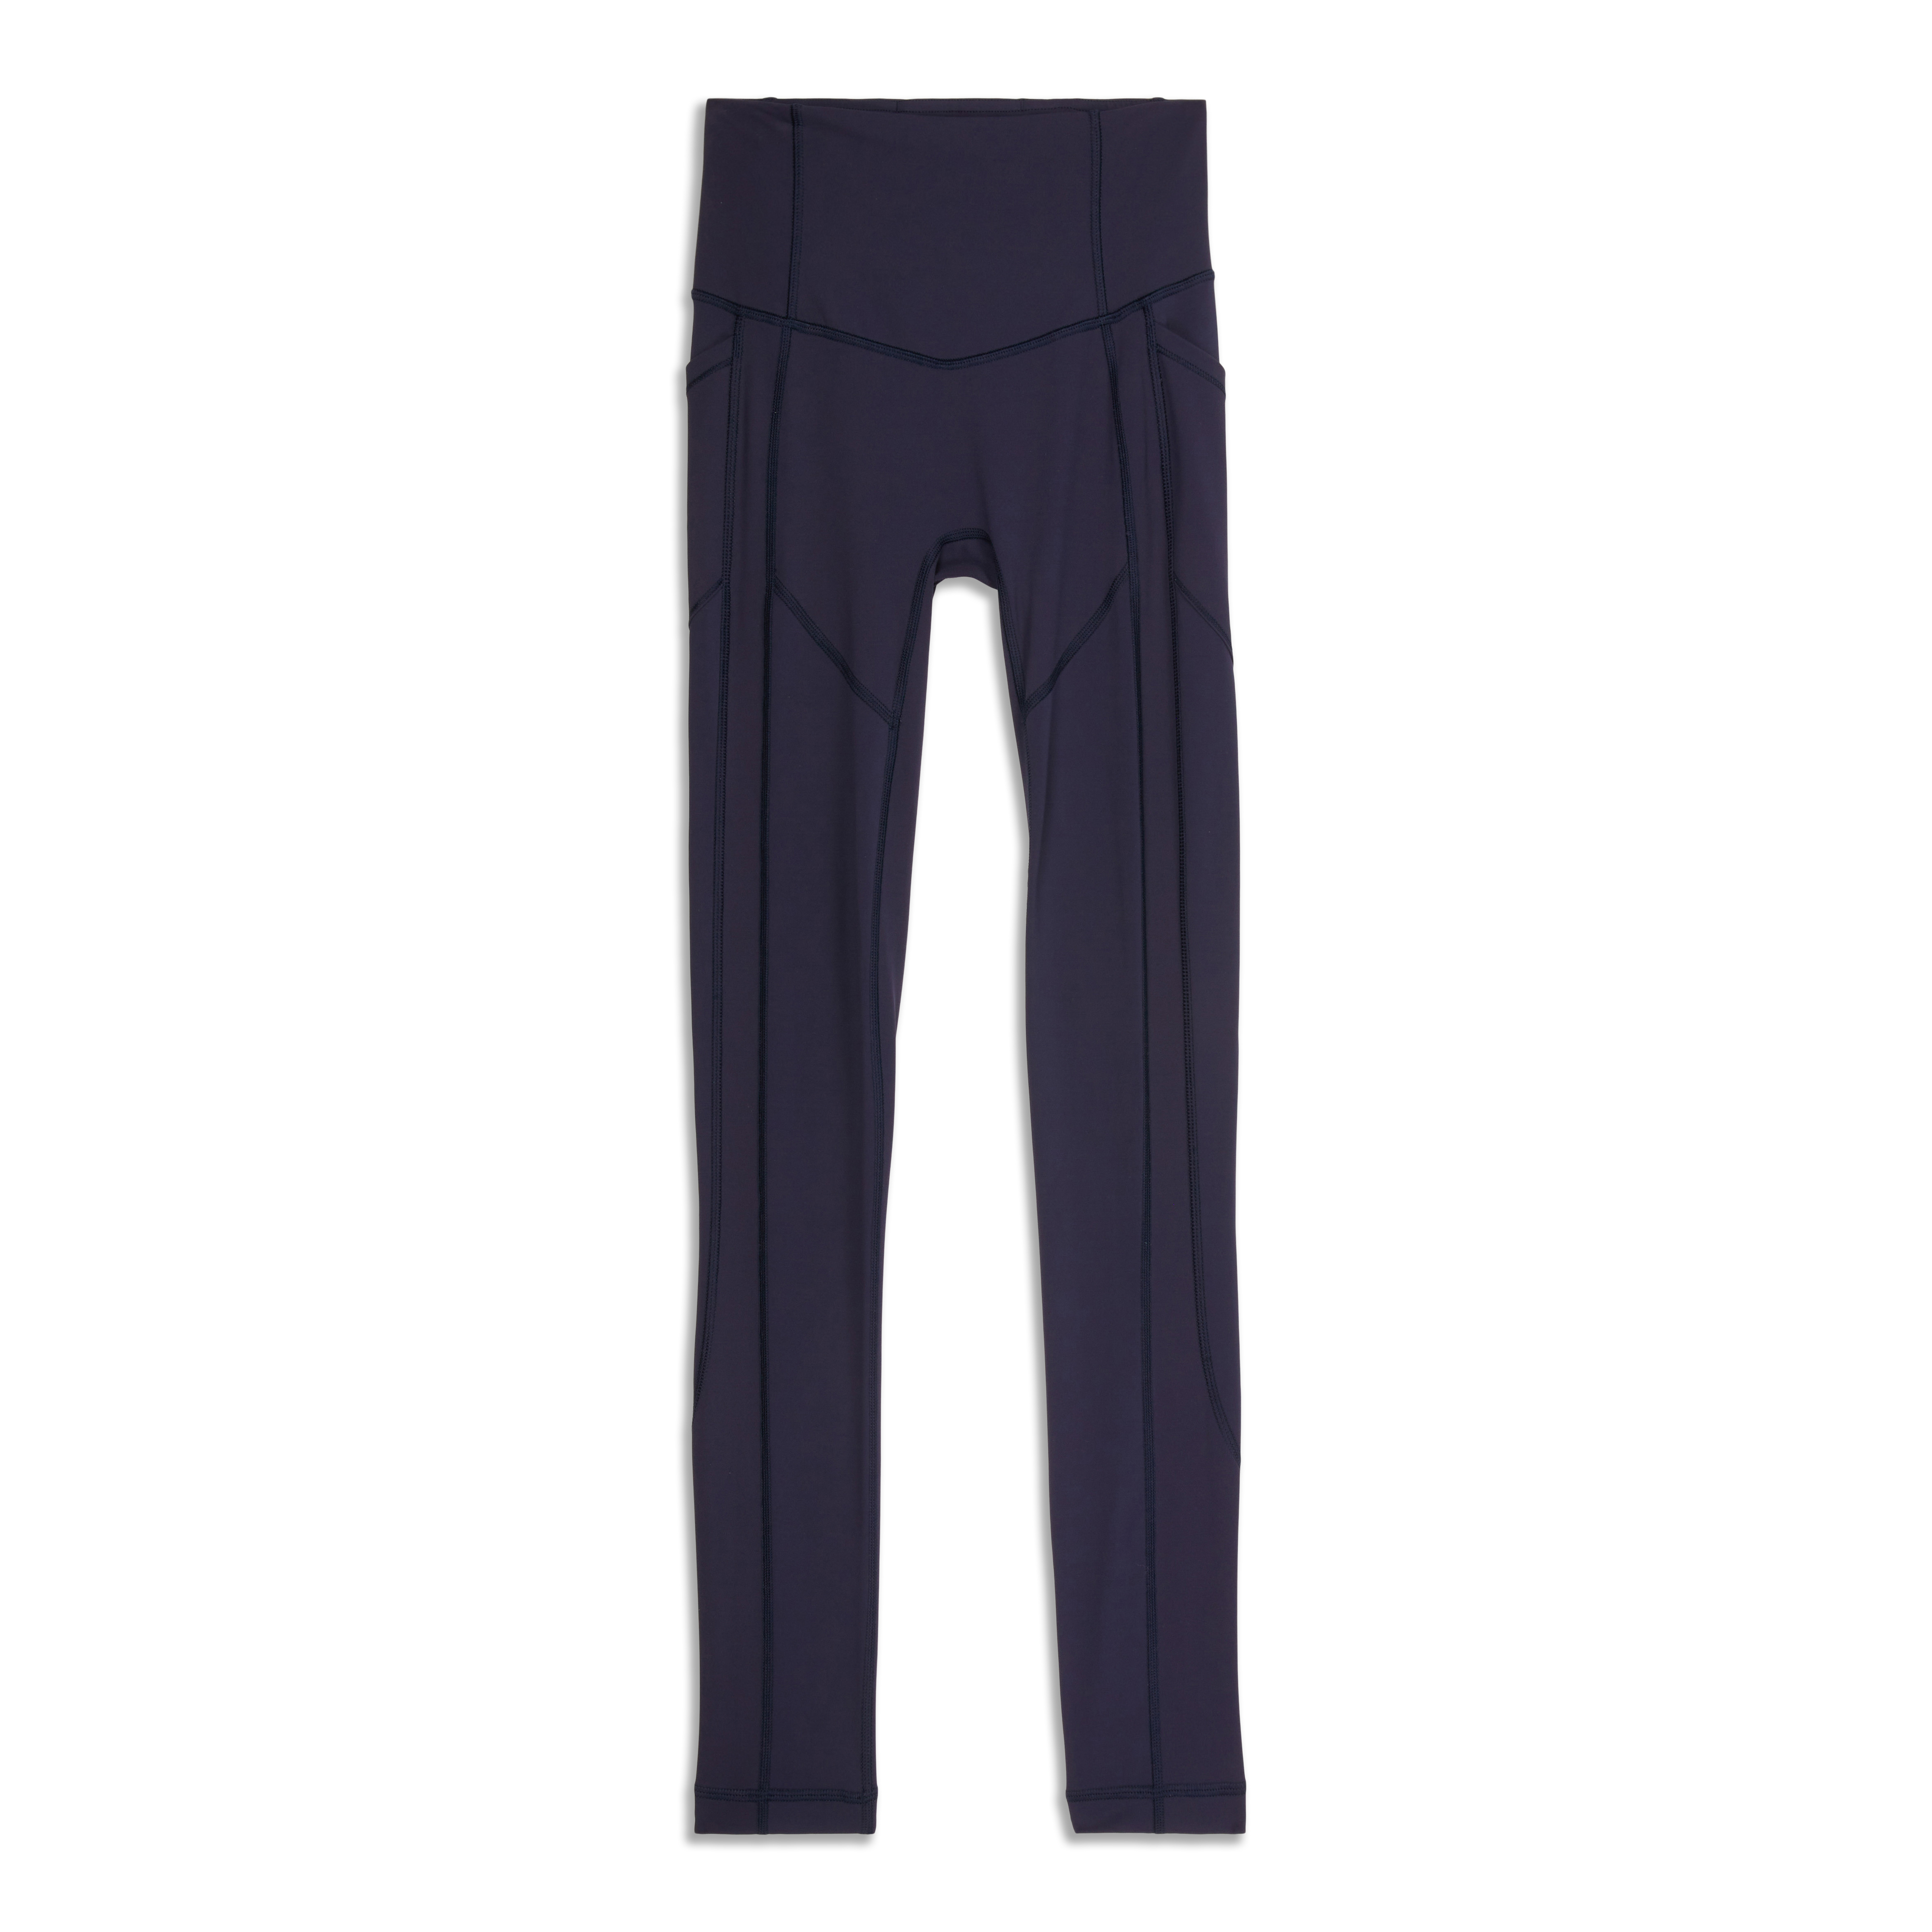 lululemon athletica, Pants & Jumpsuits, Lululemon All The Right Places  Pant Ii 28gatsby Blue Size 6